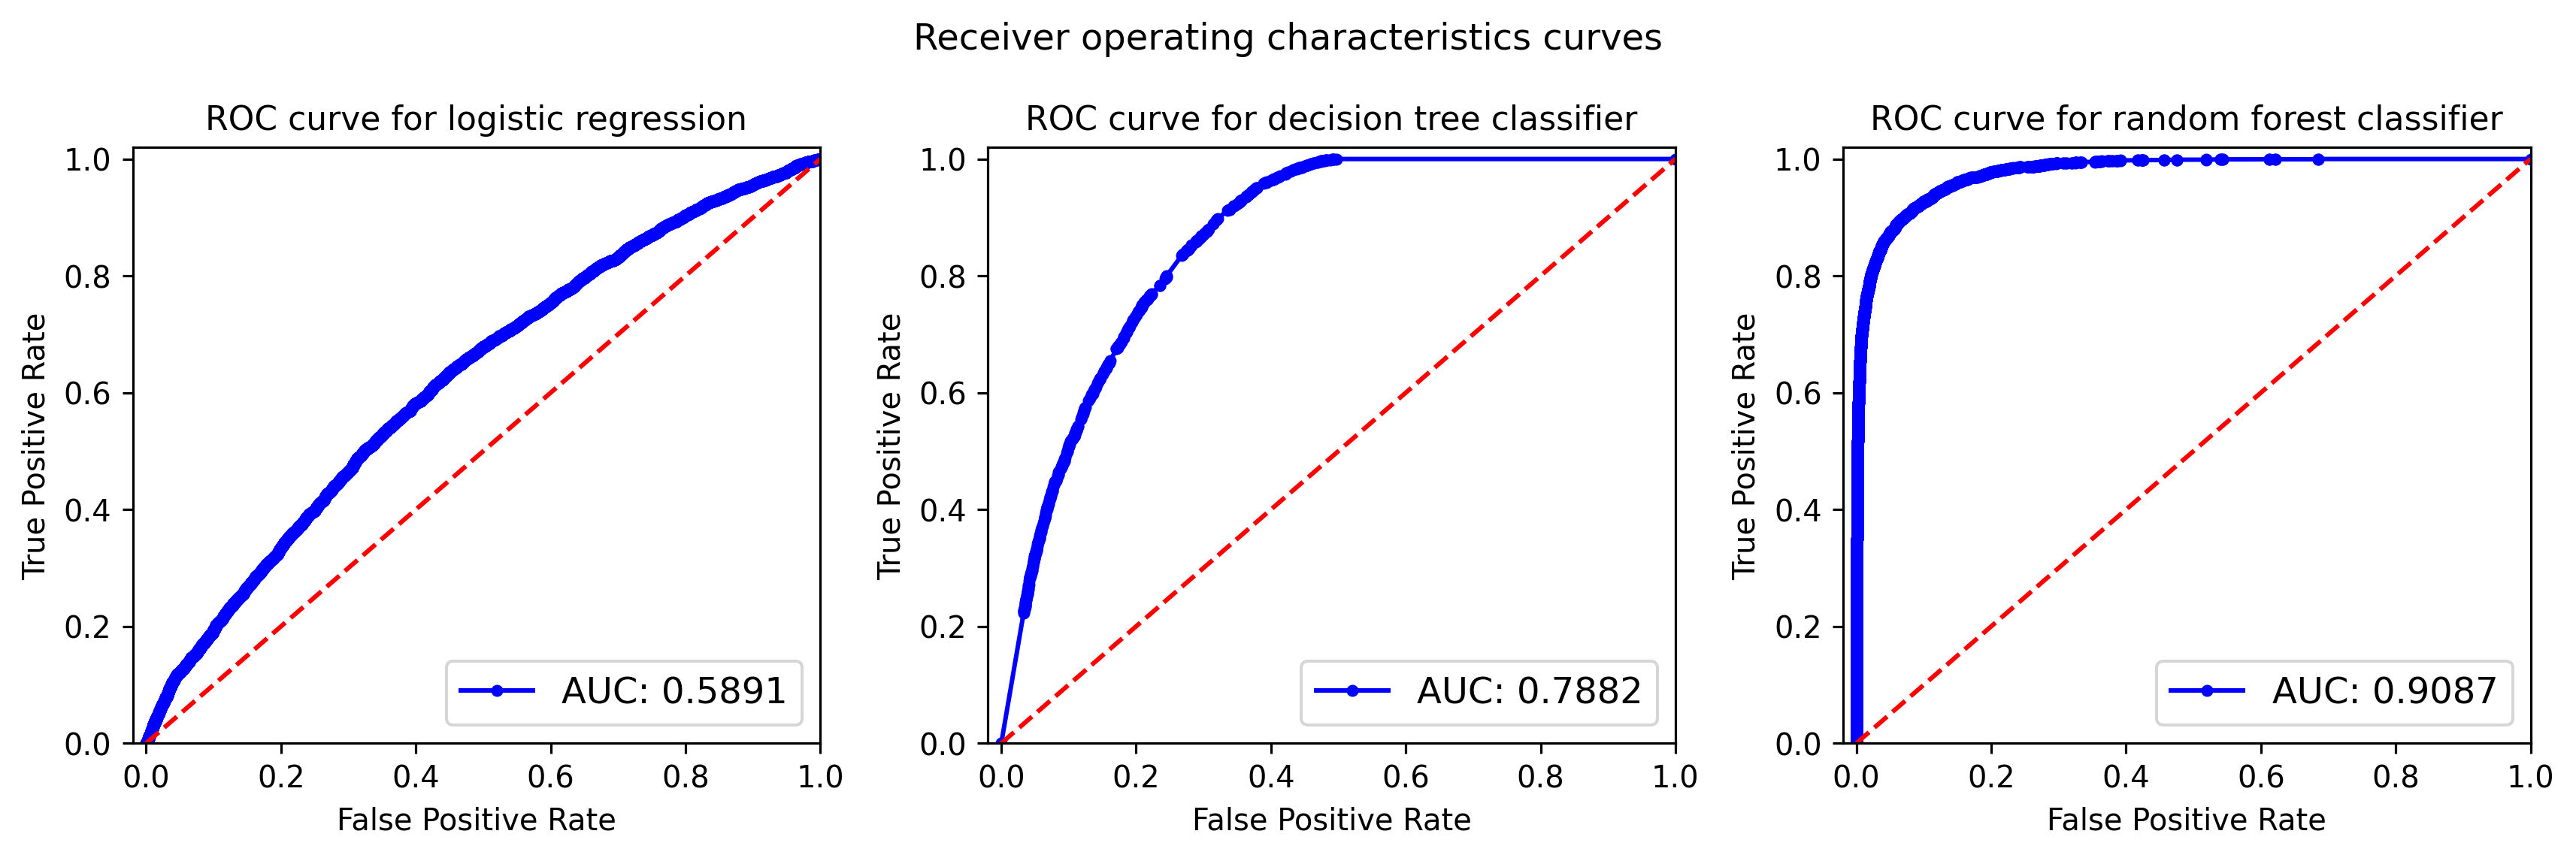 Receiver operating characteristic curve for logistic regression, decision tree classifier and random forest classifier